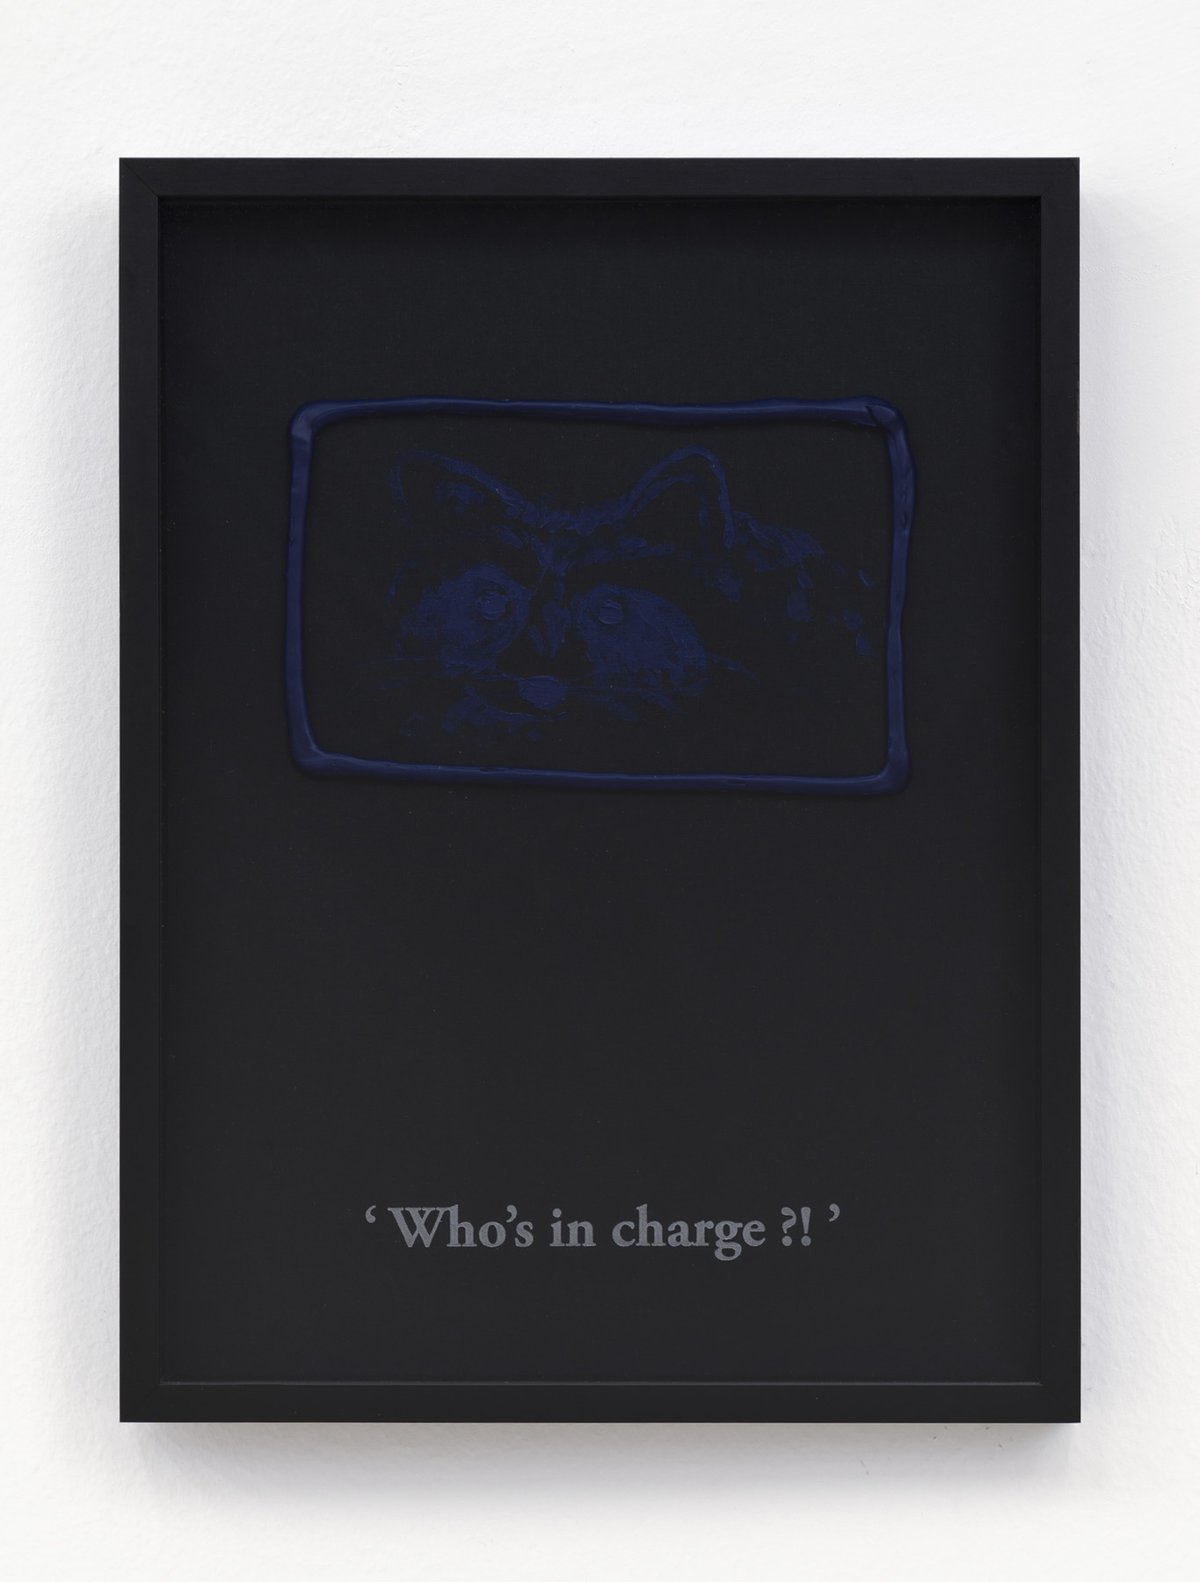 Philipp Timischl&quot;Who&#x27;s in charge?!&quot; (Black/Prussian Blue), 2017Acrylic on linen and glass-engraved object frame40.1 x 32.1 cm